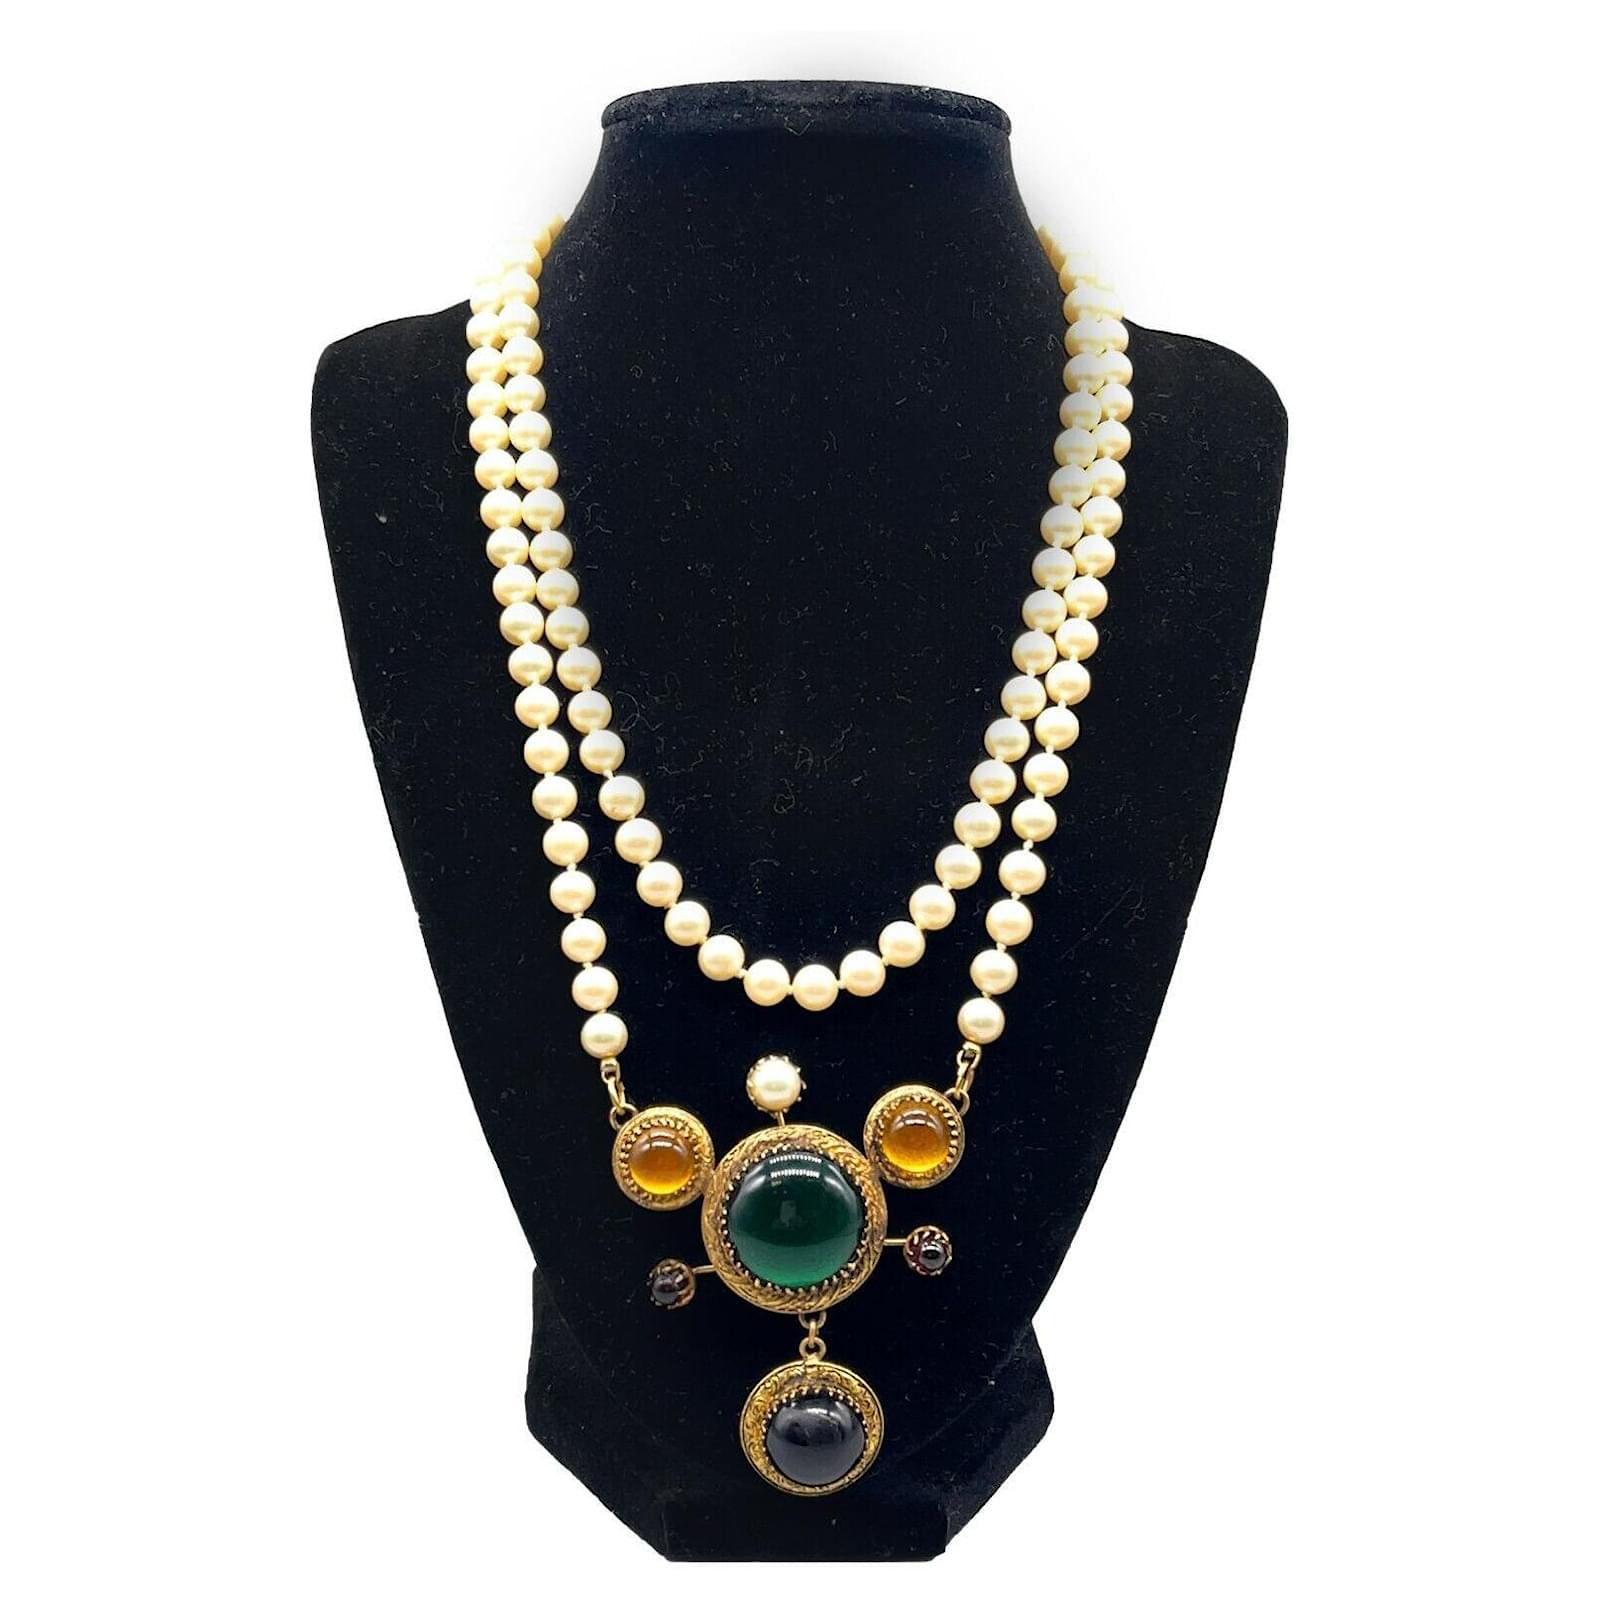 Sold at Auction: Vintage Chanel Double Strand Faux Pearl Necklace